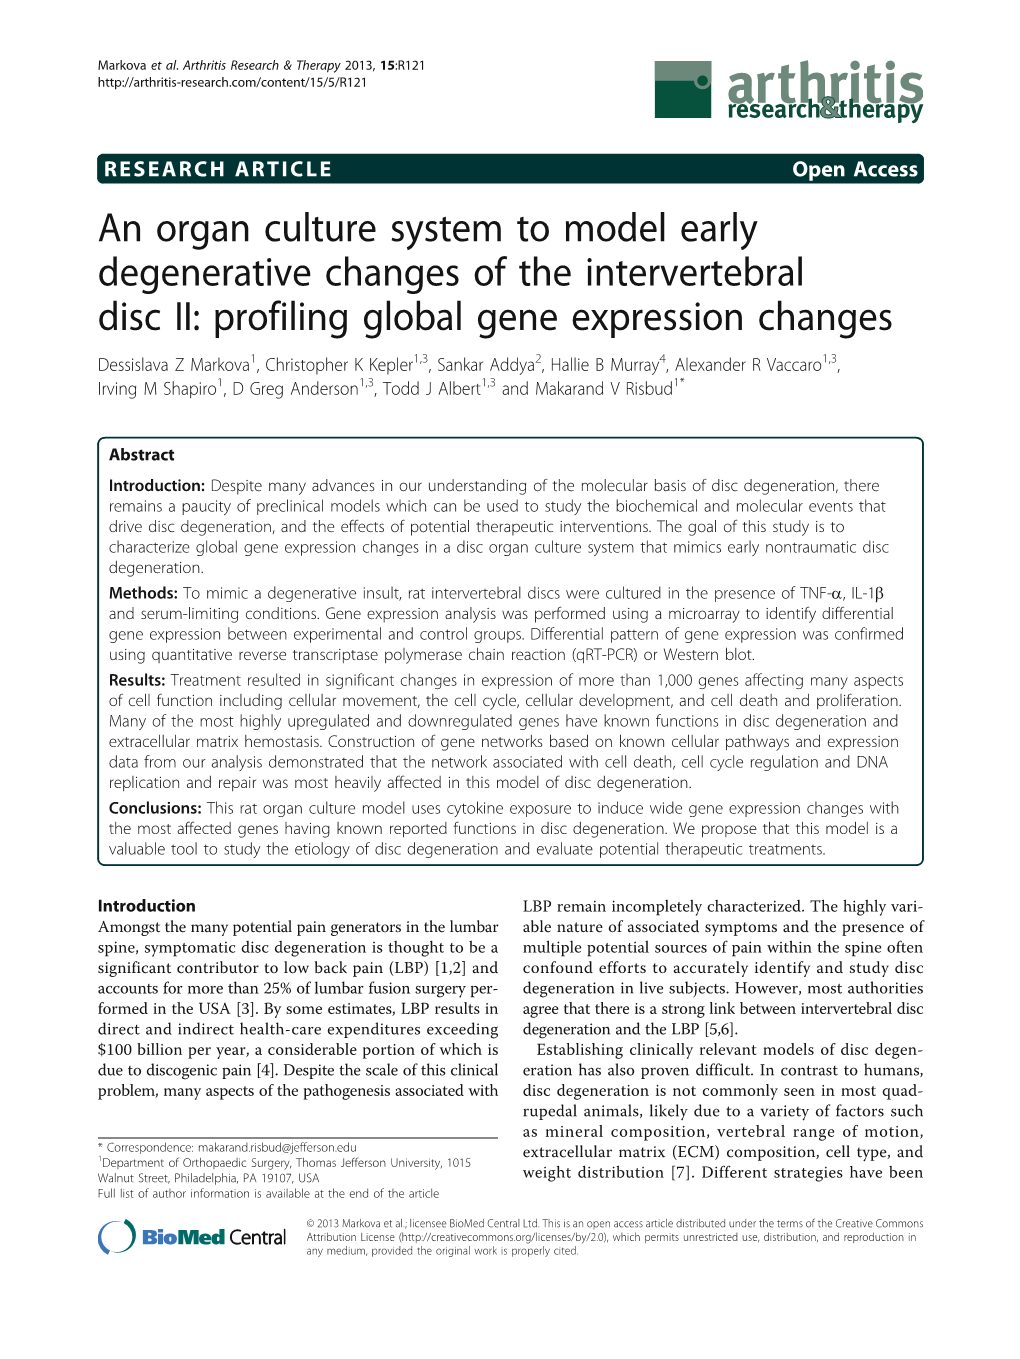 An Organ Culture System to Model Early Degenerative Changes of the Intervertebral Disc II: Profiling Global Gene Expression Chan